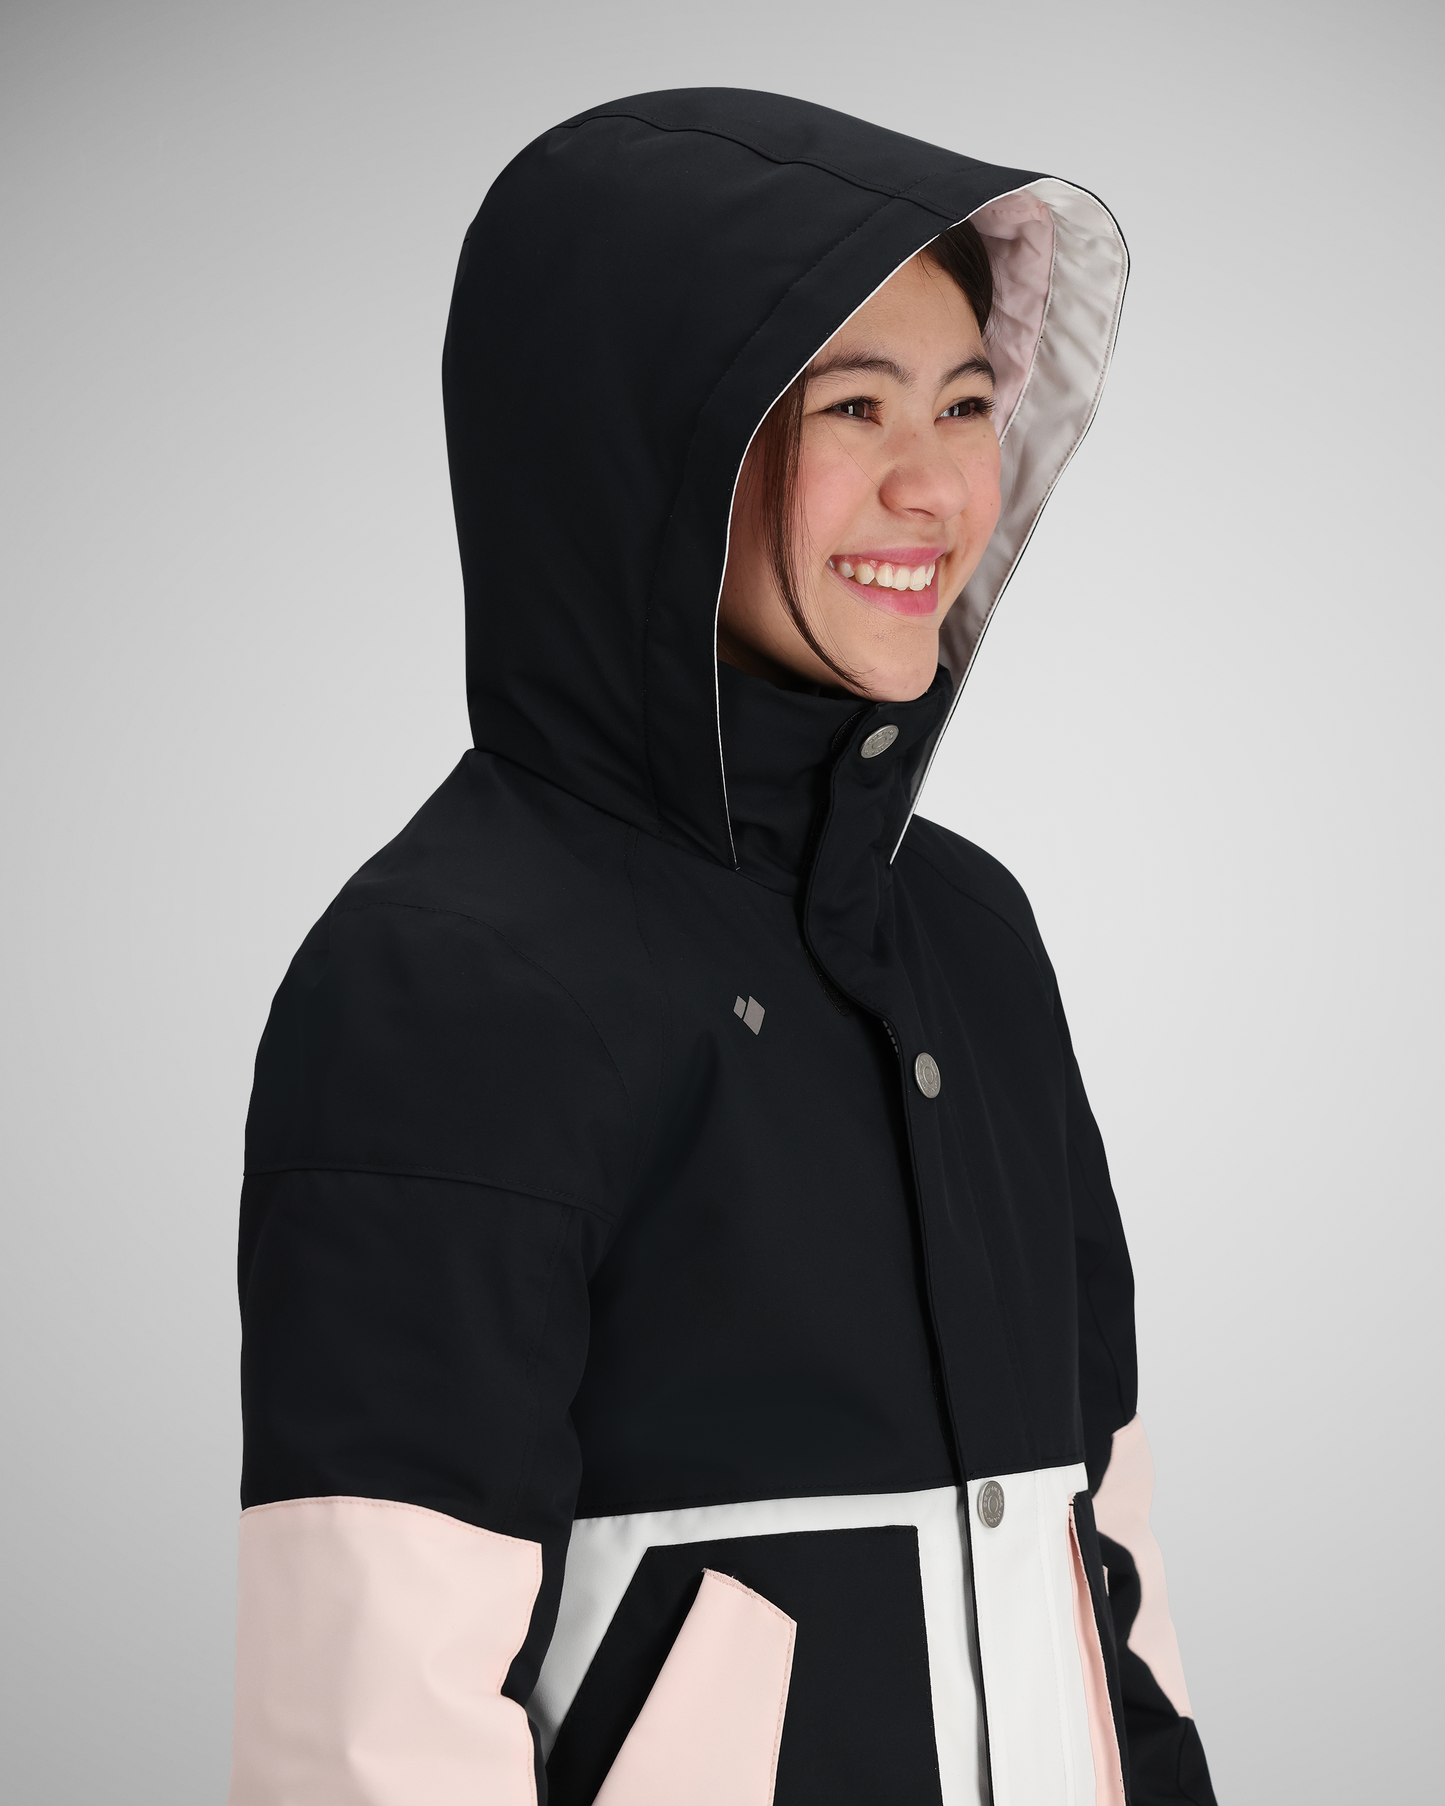 Adjustable hood | Hoods are invaluable for extra protection and comfort in the elements. Depending on the style and its purpose, all Obermeyer hoods offer a wide range of adjustments. Each hood is specifically designed with each jacket style to best shelter your head and neck in challenging weather conditions.